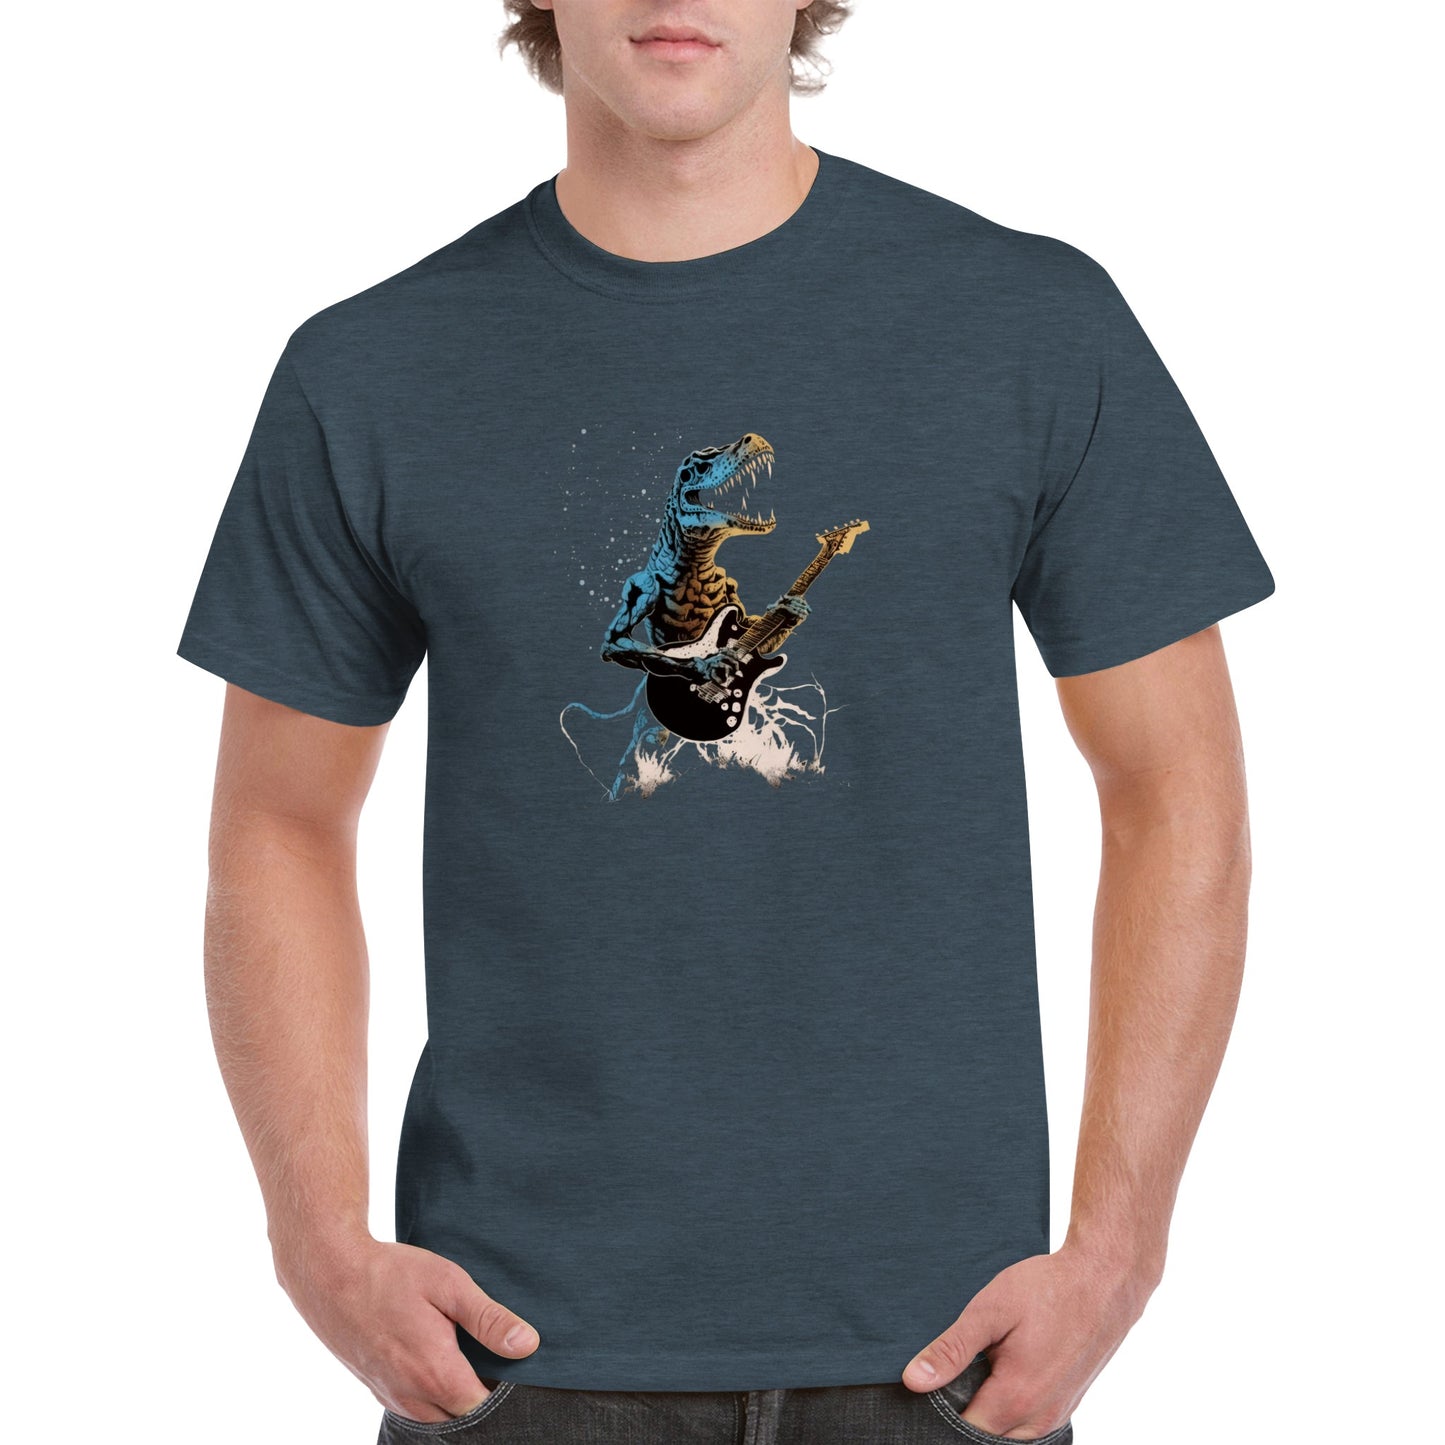 Rock Out with the T-Rex Playing a Guitar Heavyweight Unisex Crewneck T-Shirt!